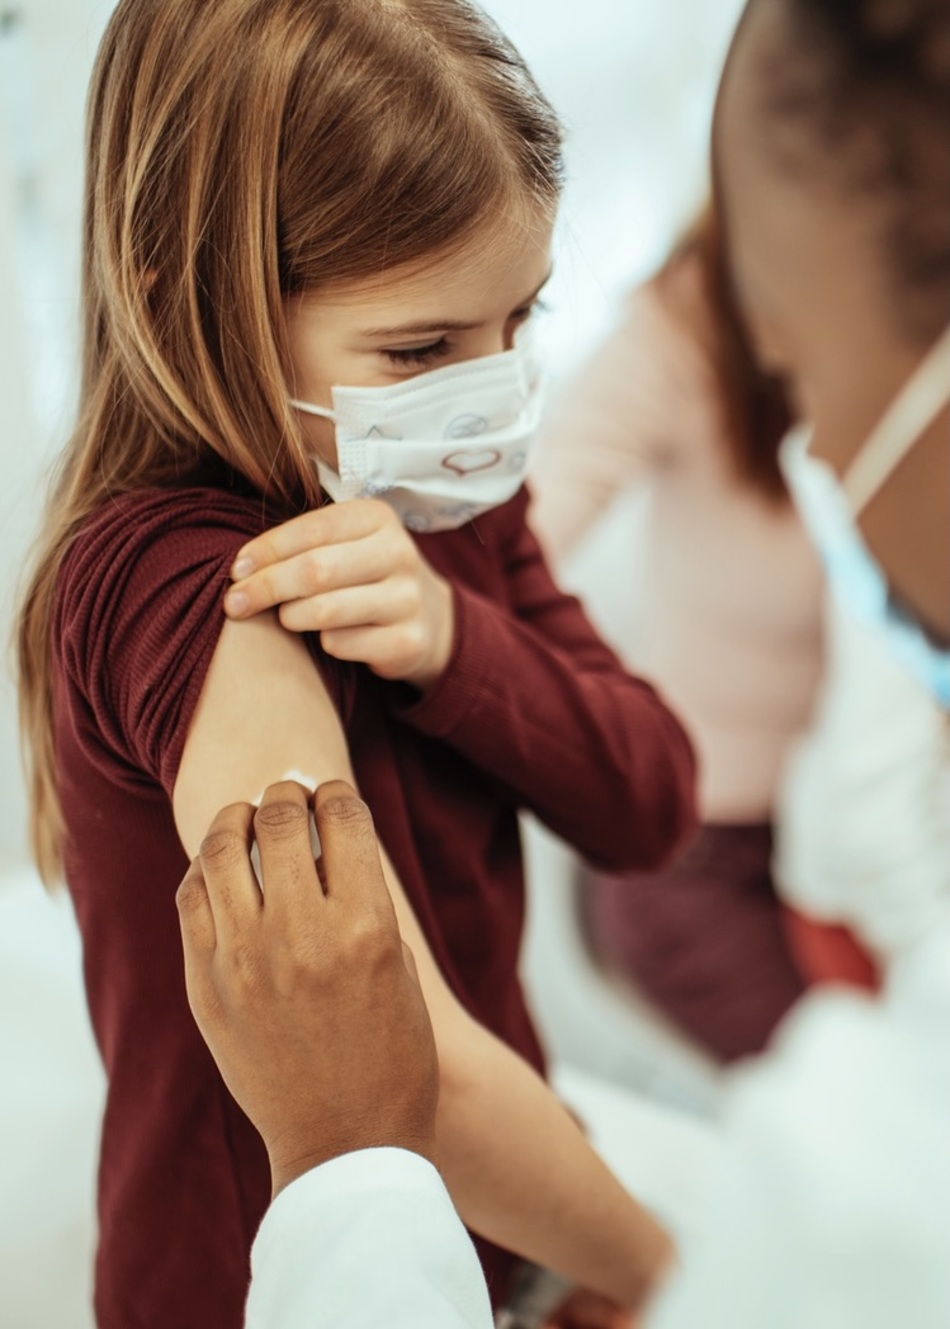 The COVID Vaccine is Safe for Kids